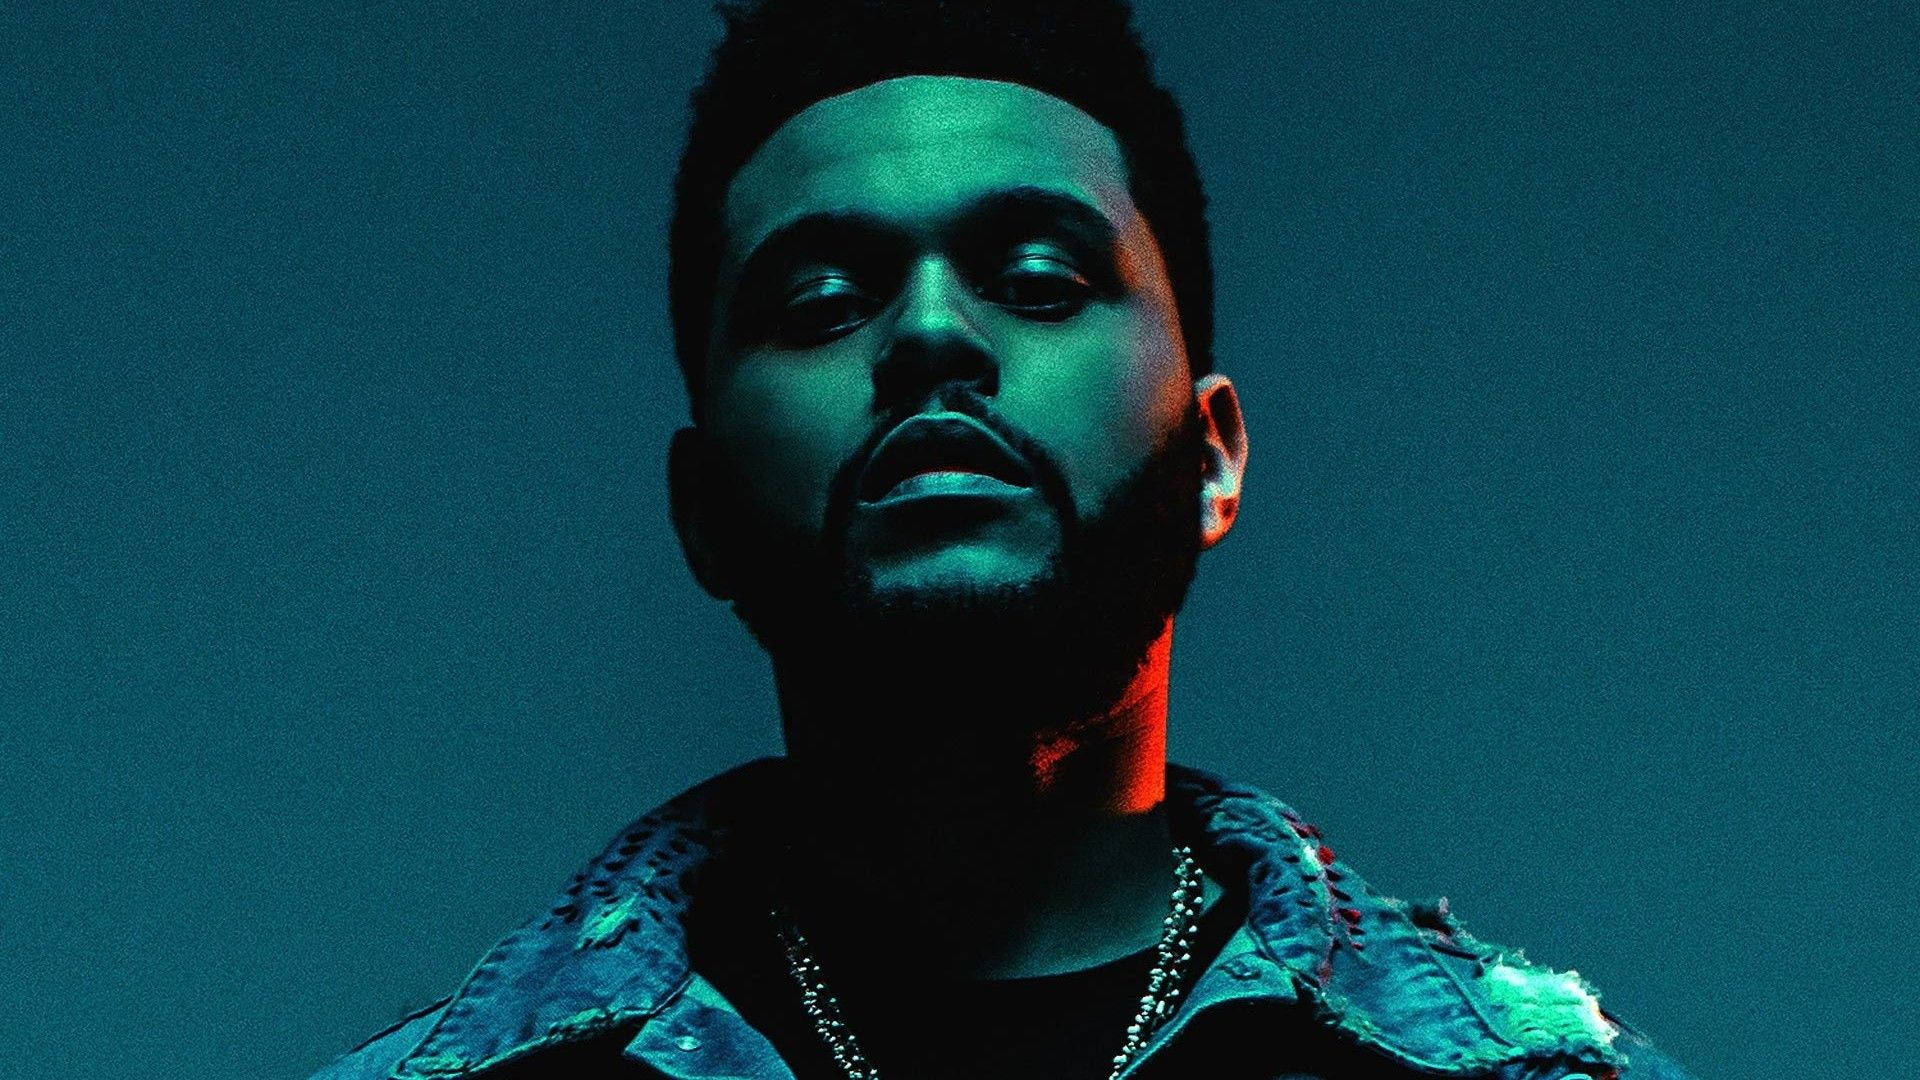 Free The Weeknd Wallpaper Downloads, [100+] The Weeknd Wallpapers for FREE  